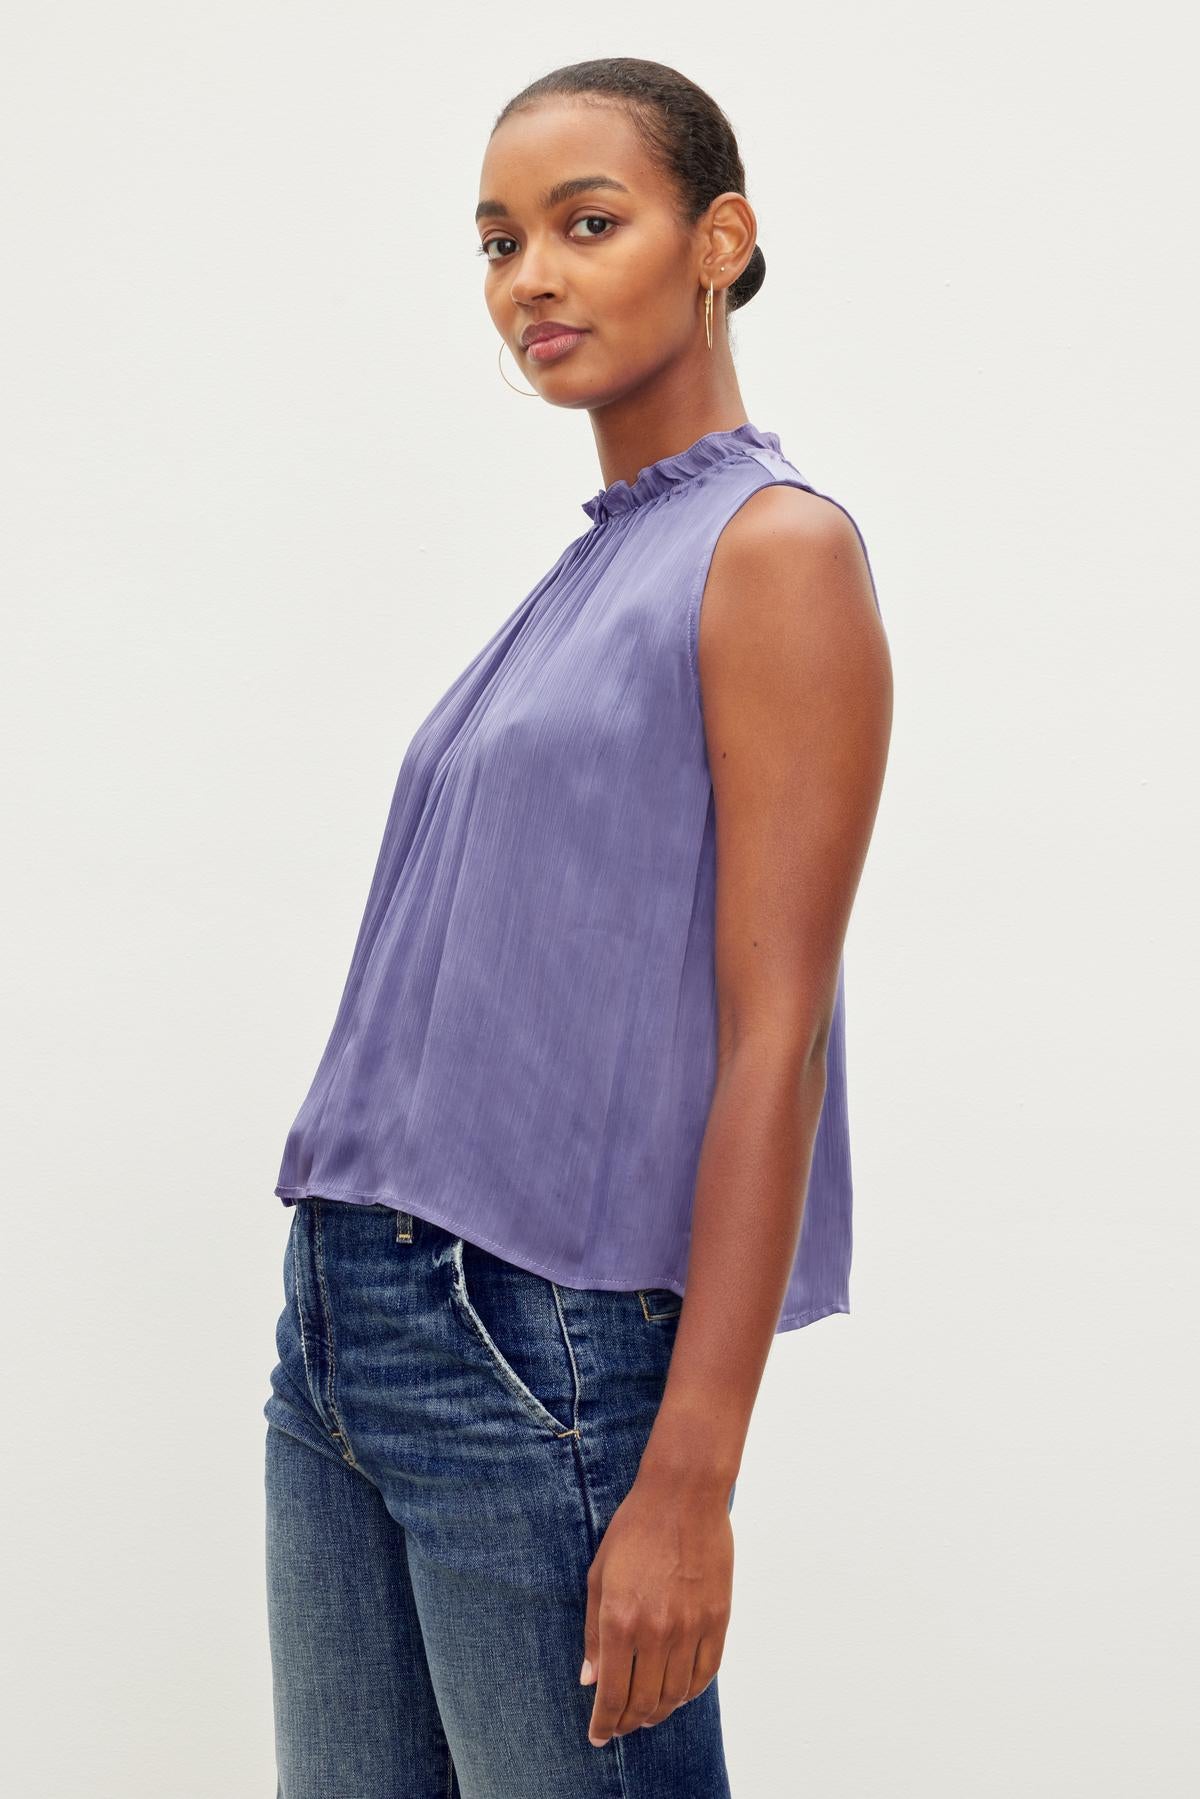 Person standing sideways wearing a sleeveless purple KIANA RUFFLE NECK TANK TOP by Velvet by Graham & Spencer and blue jeans, looking forward with a neutral expression.-37073693278401